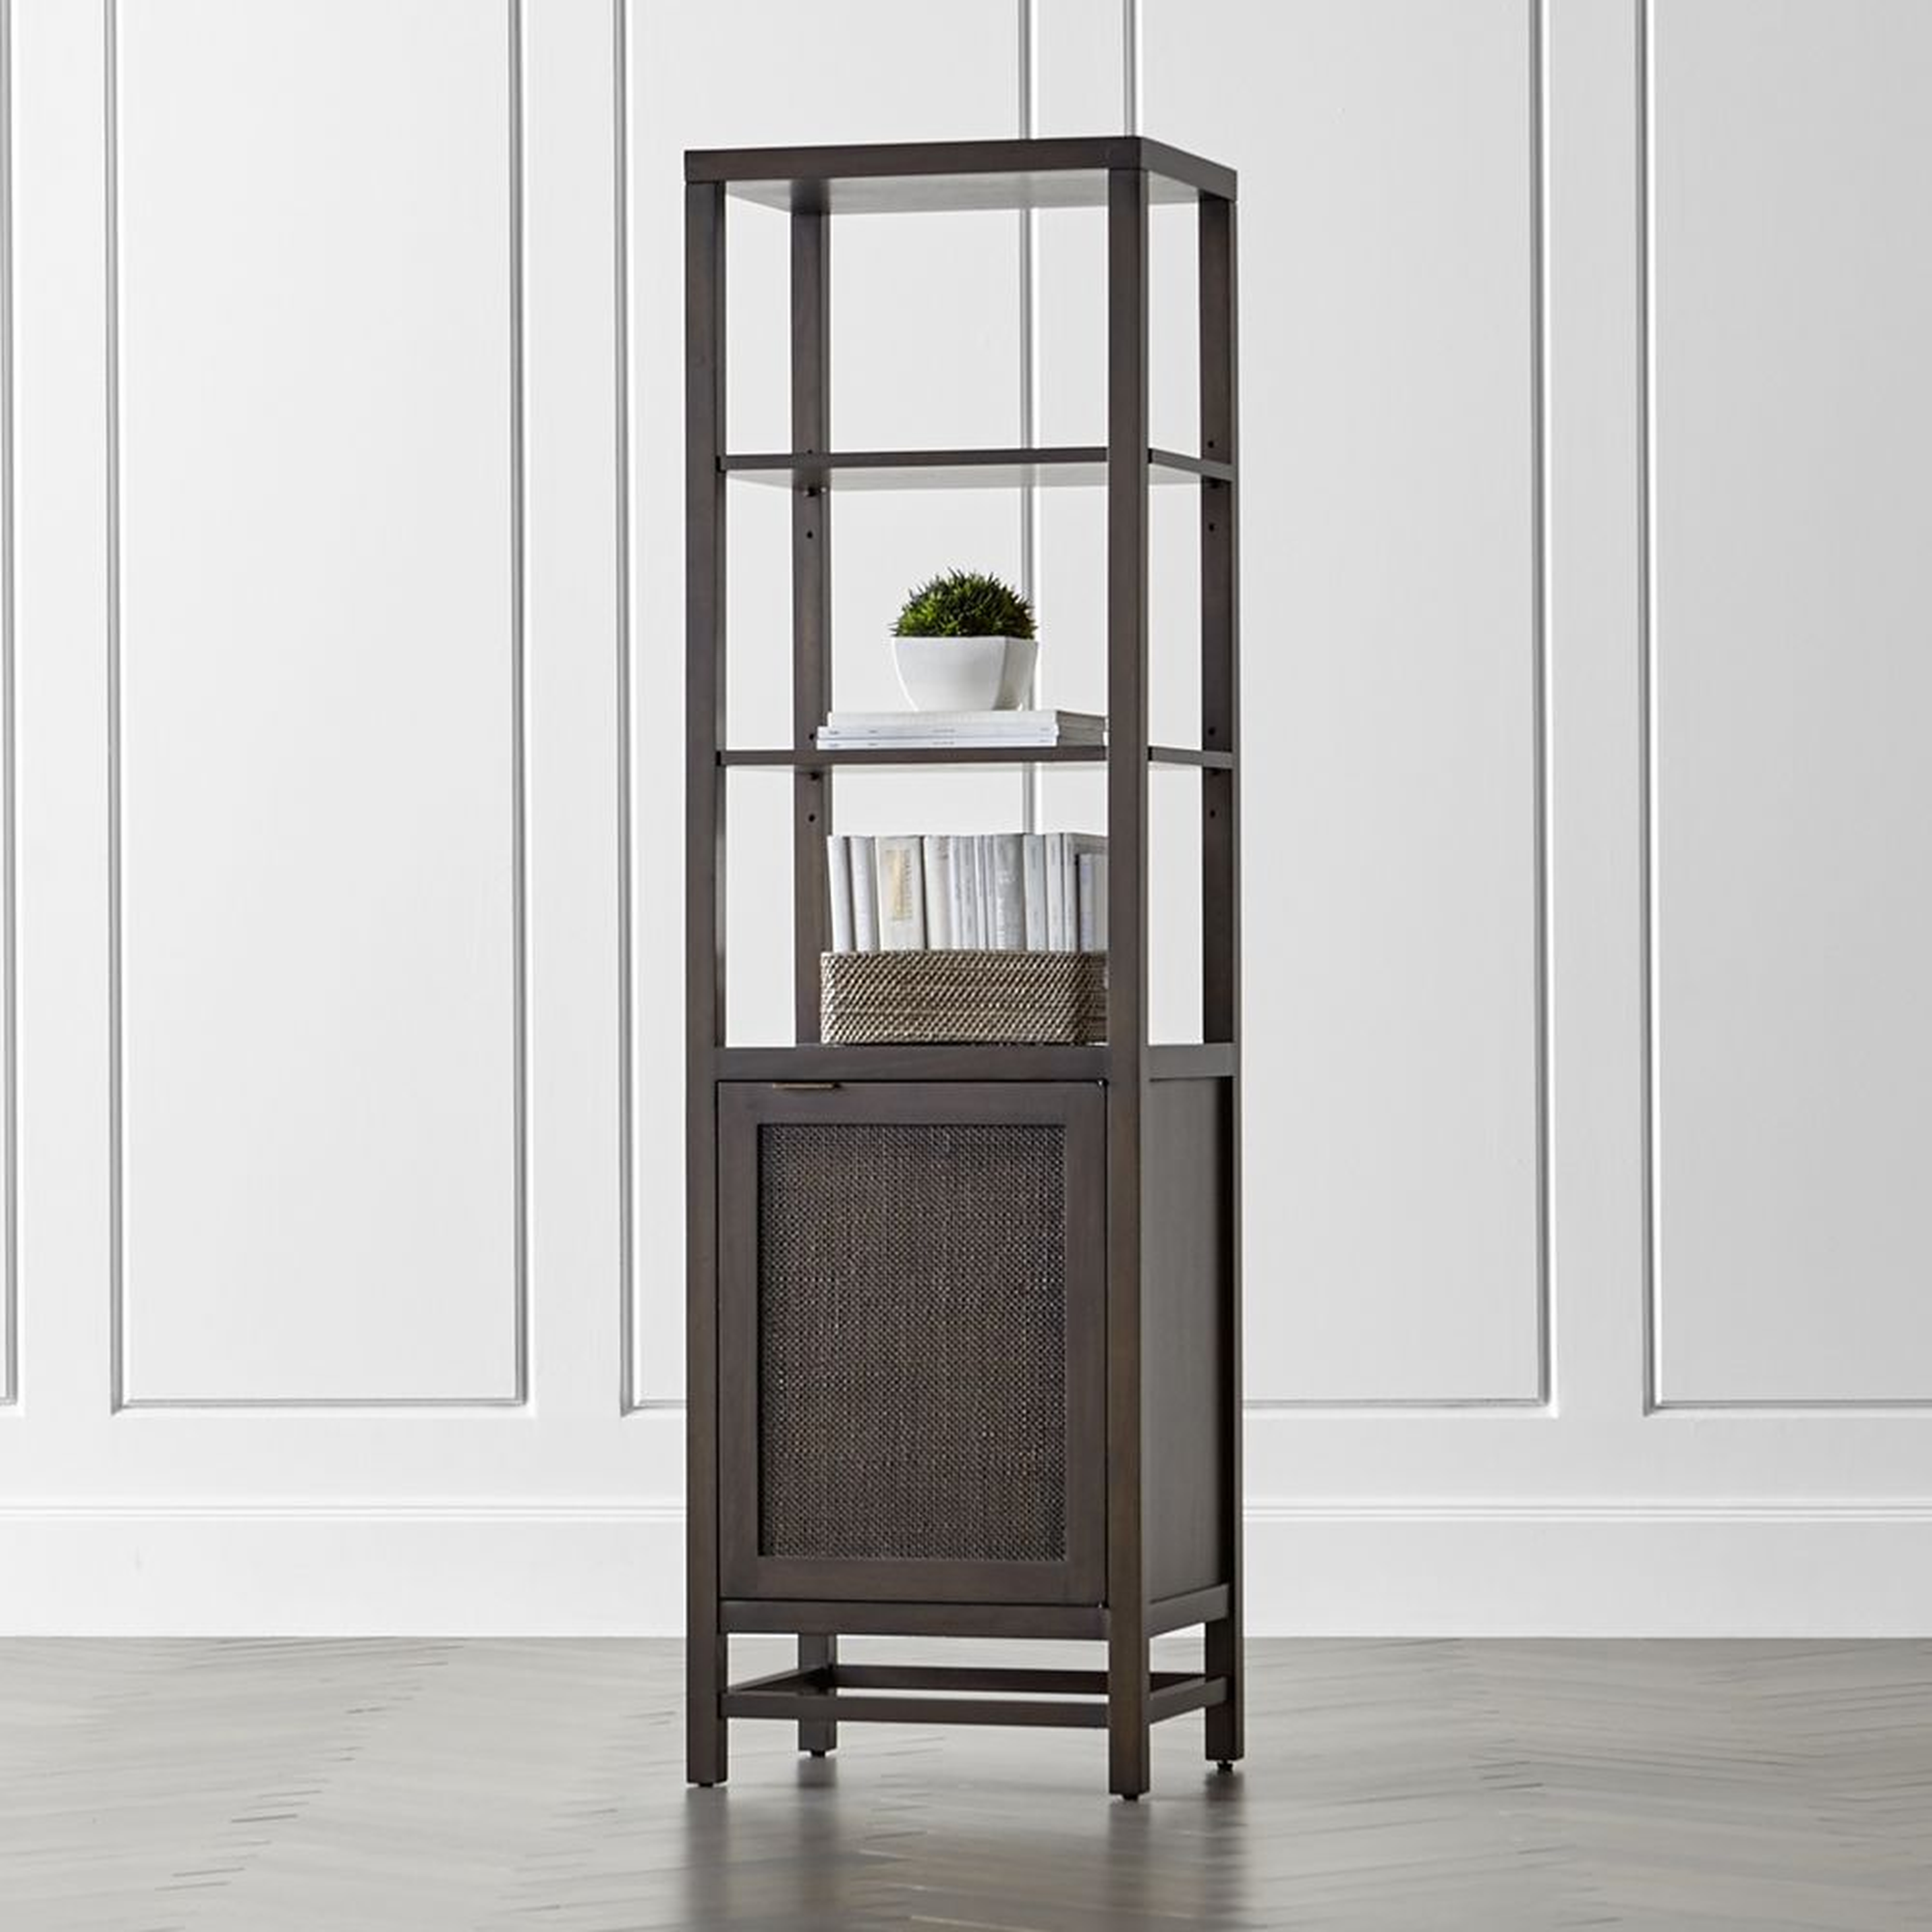 Blake Carbon Tall Cabinet - Crate and Barrel